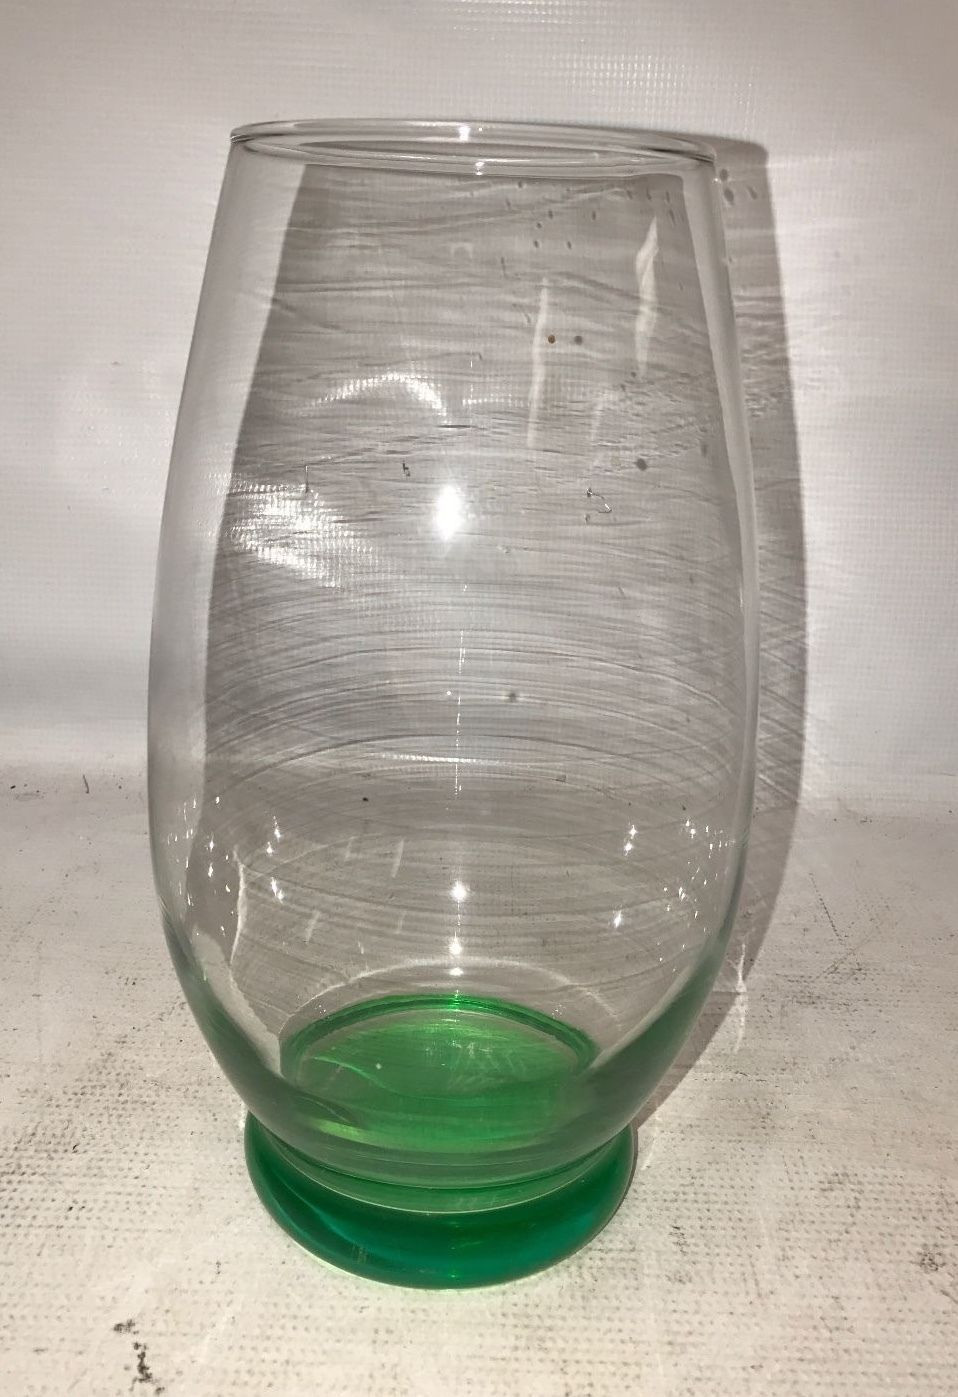 14 Recommended Wide Neck Glass Vase 2024 free download wide neck glass vase of pretty green glass bottom vase basin shape nice look wide regarding pretty green glass bottom vase basin shape nice look wide mouth s